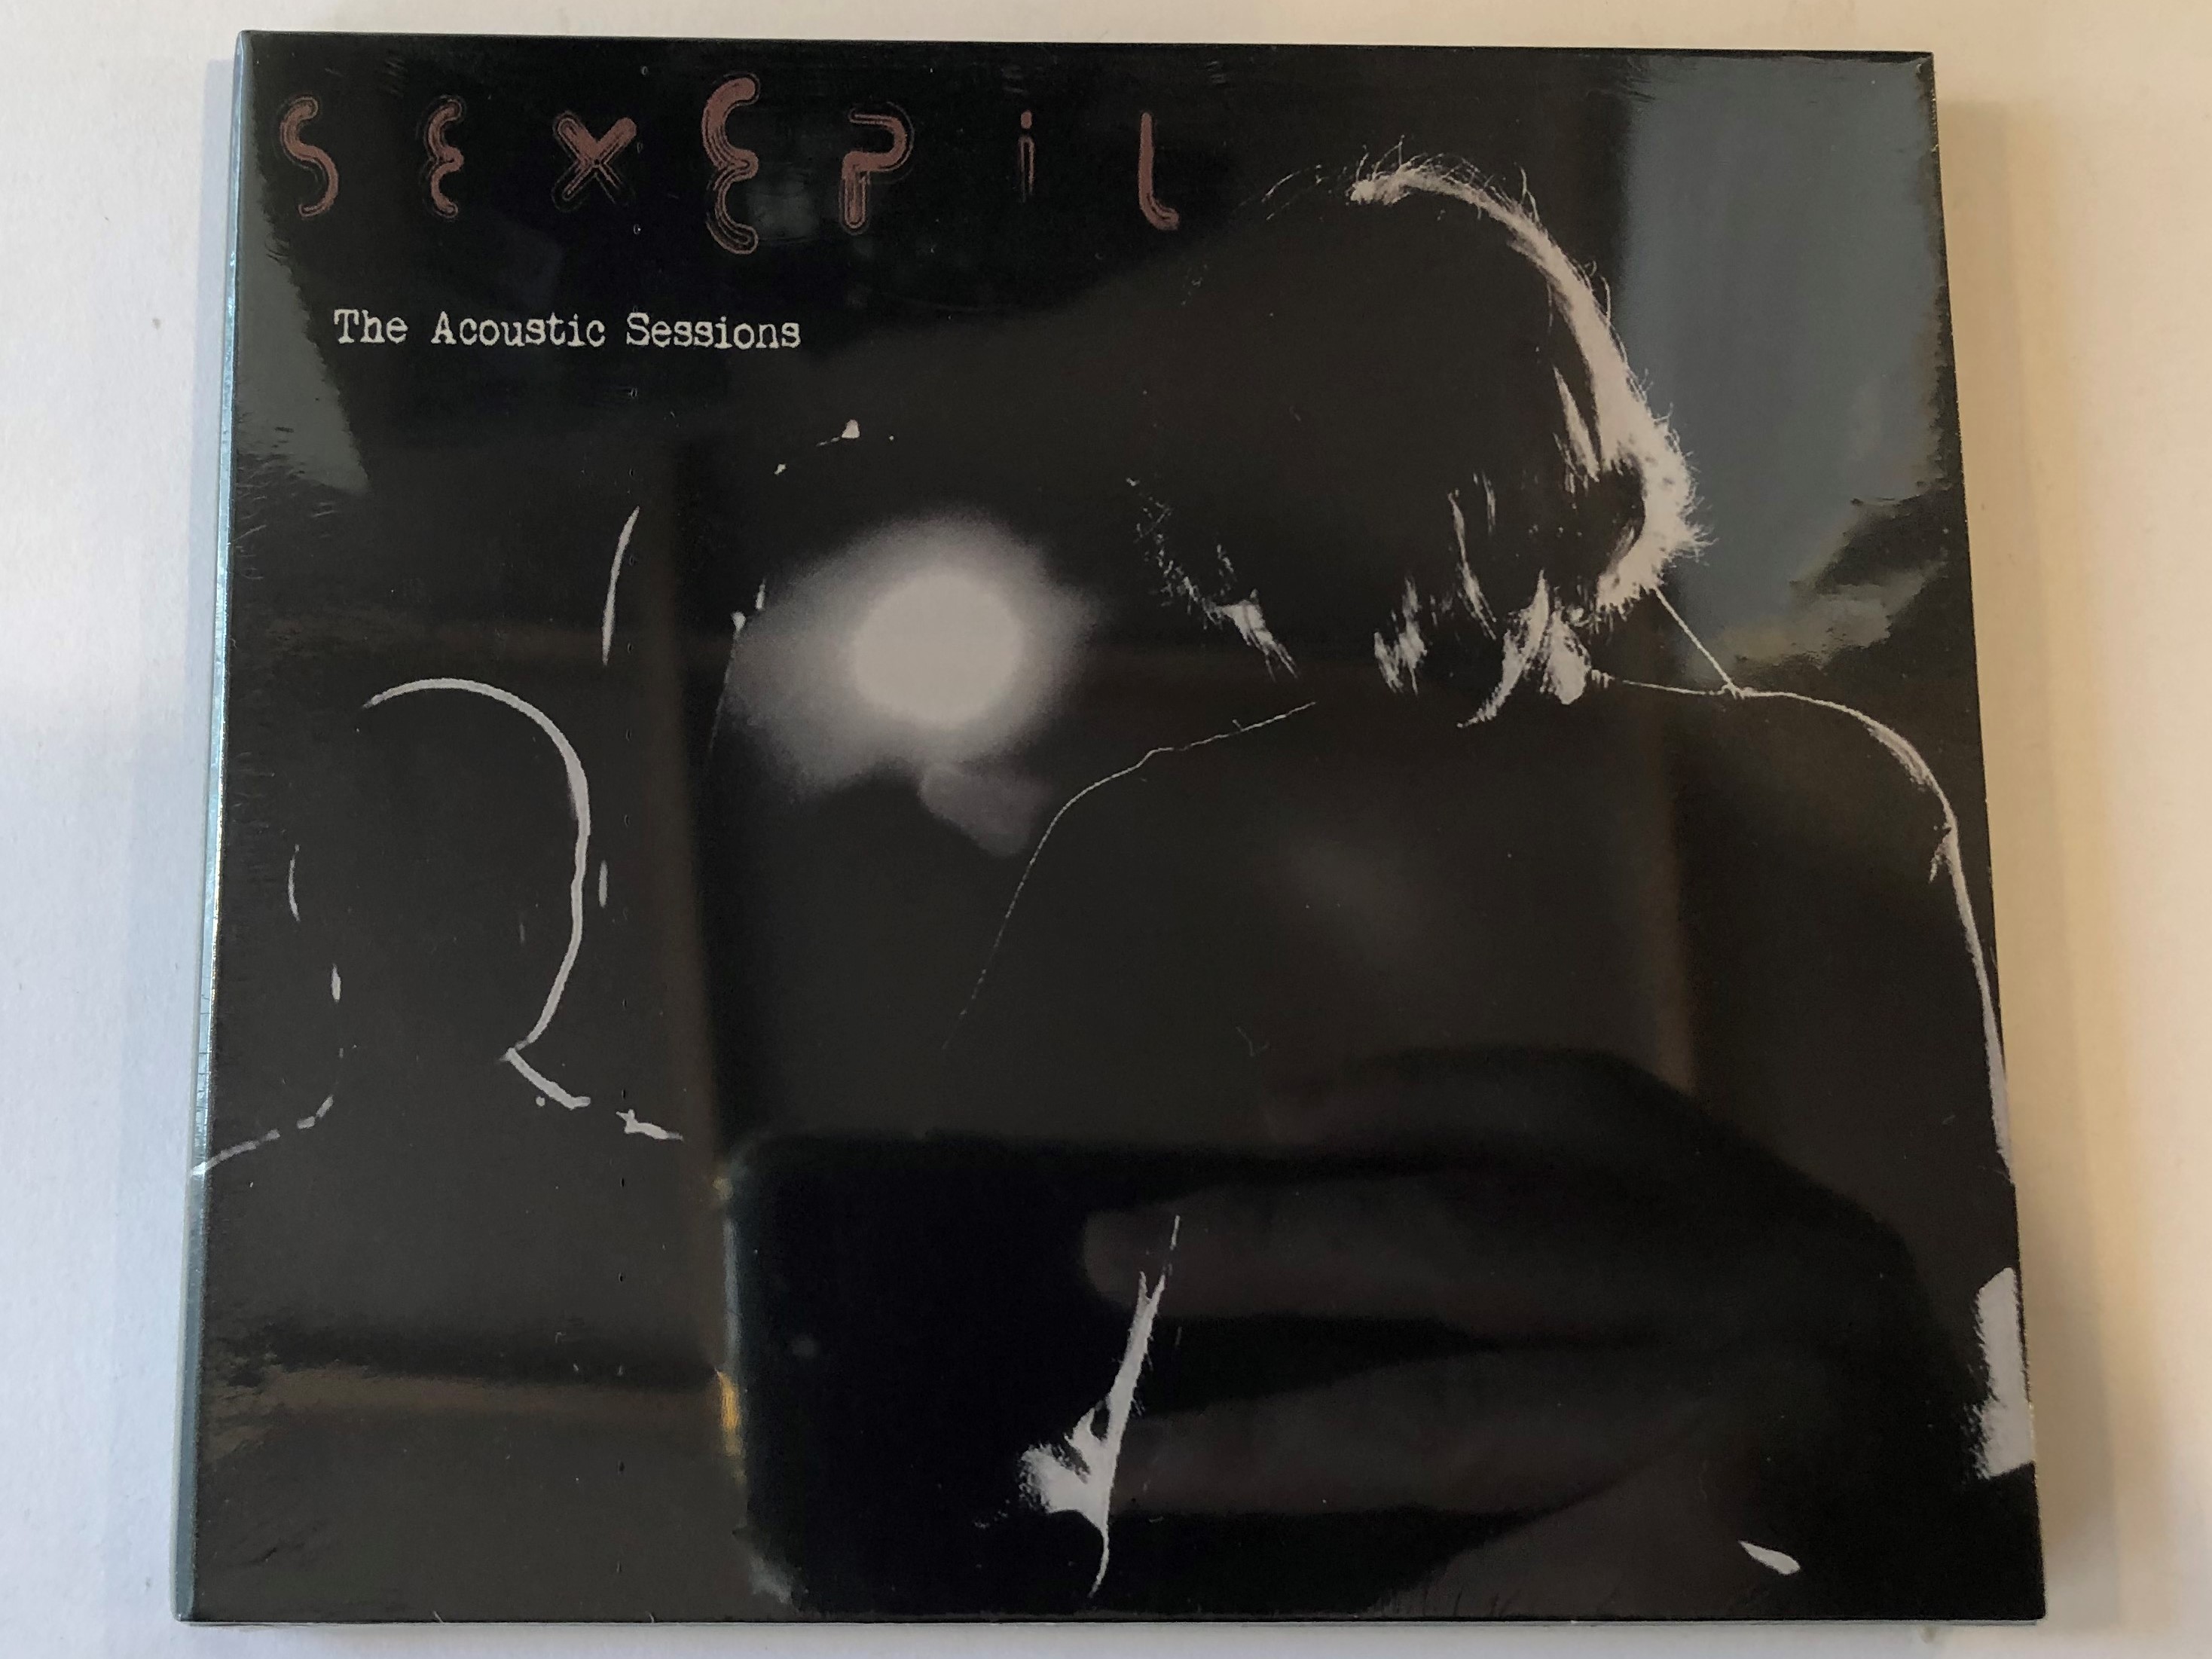 sexepil-the-acoustic-sessions-grundrecords-audio-cd-2017-gr082-1-.jpg